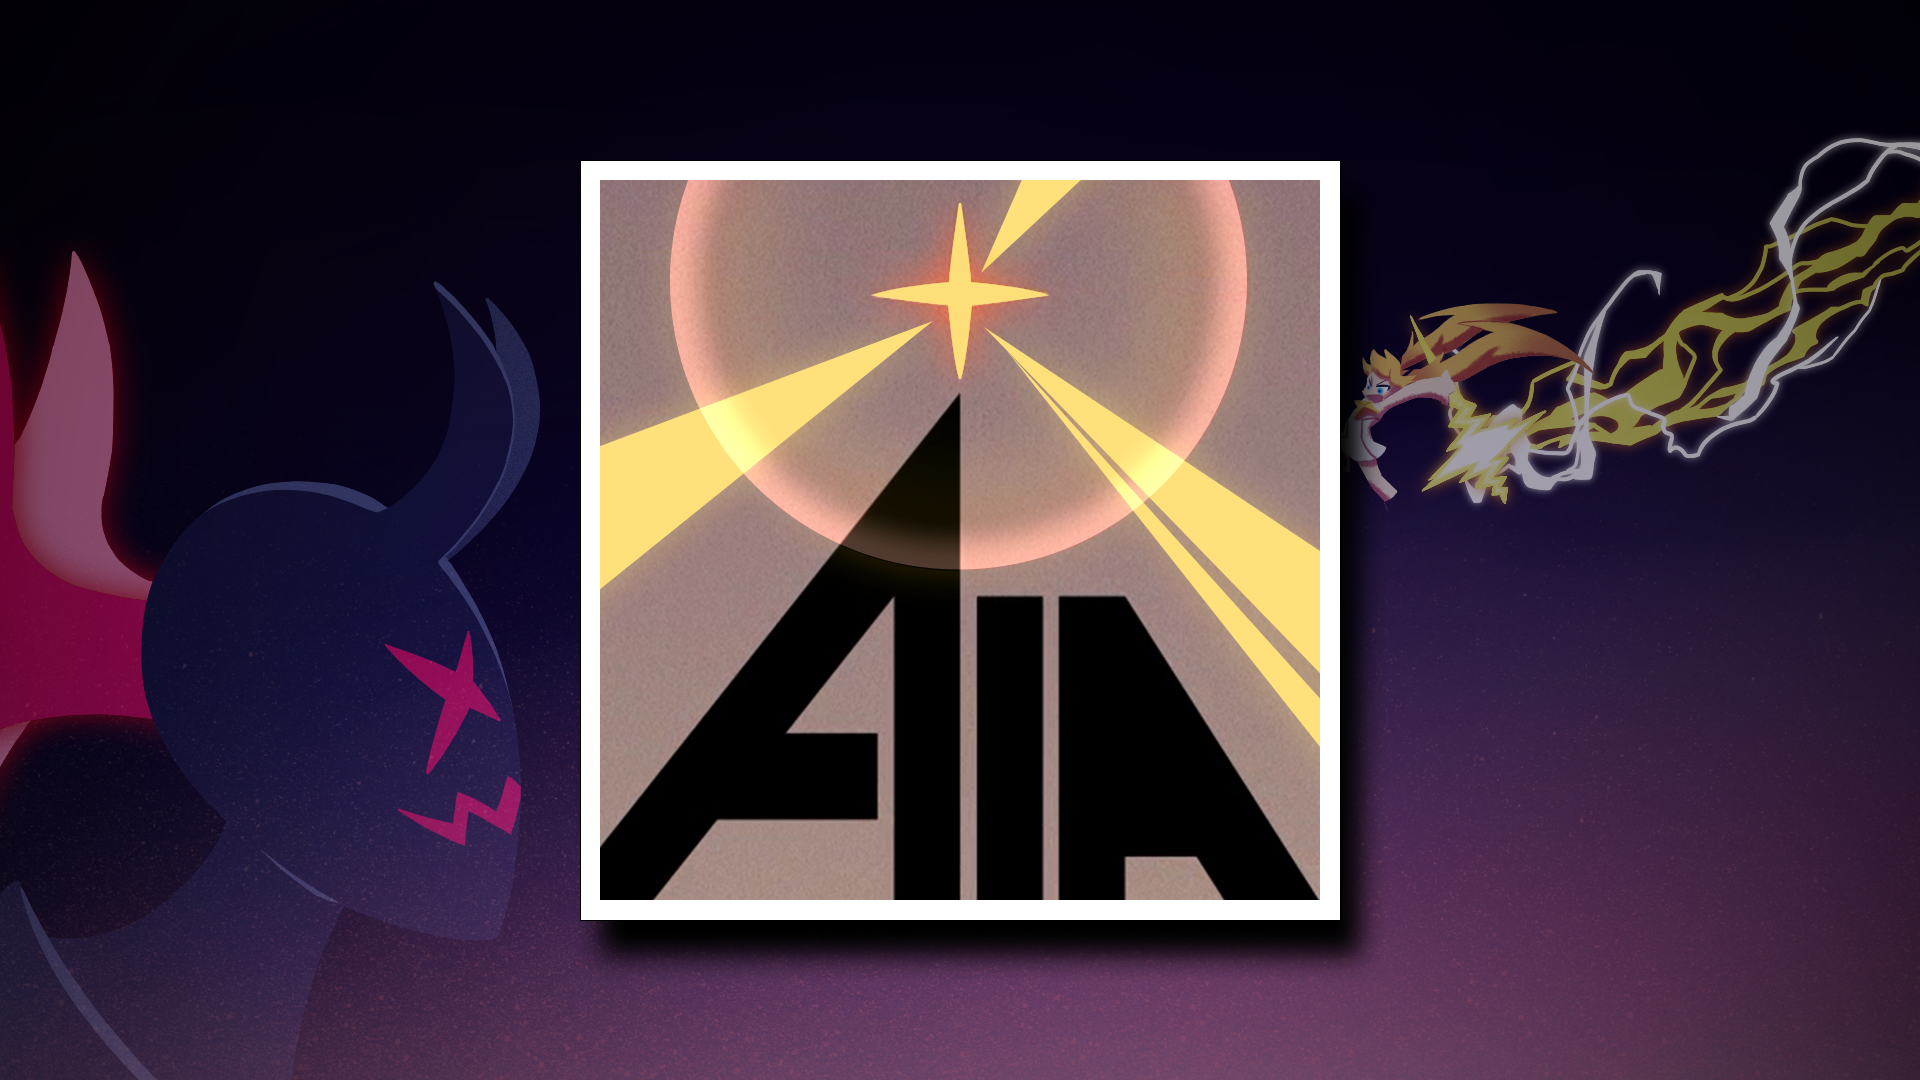 Icon for ON AIR